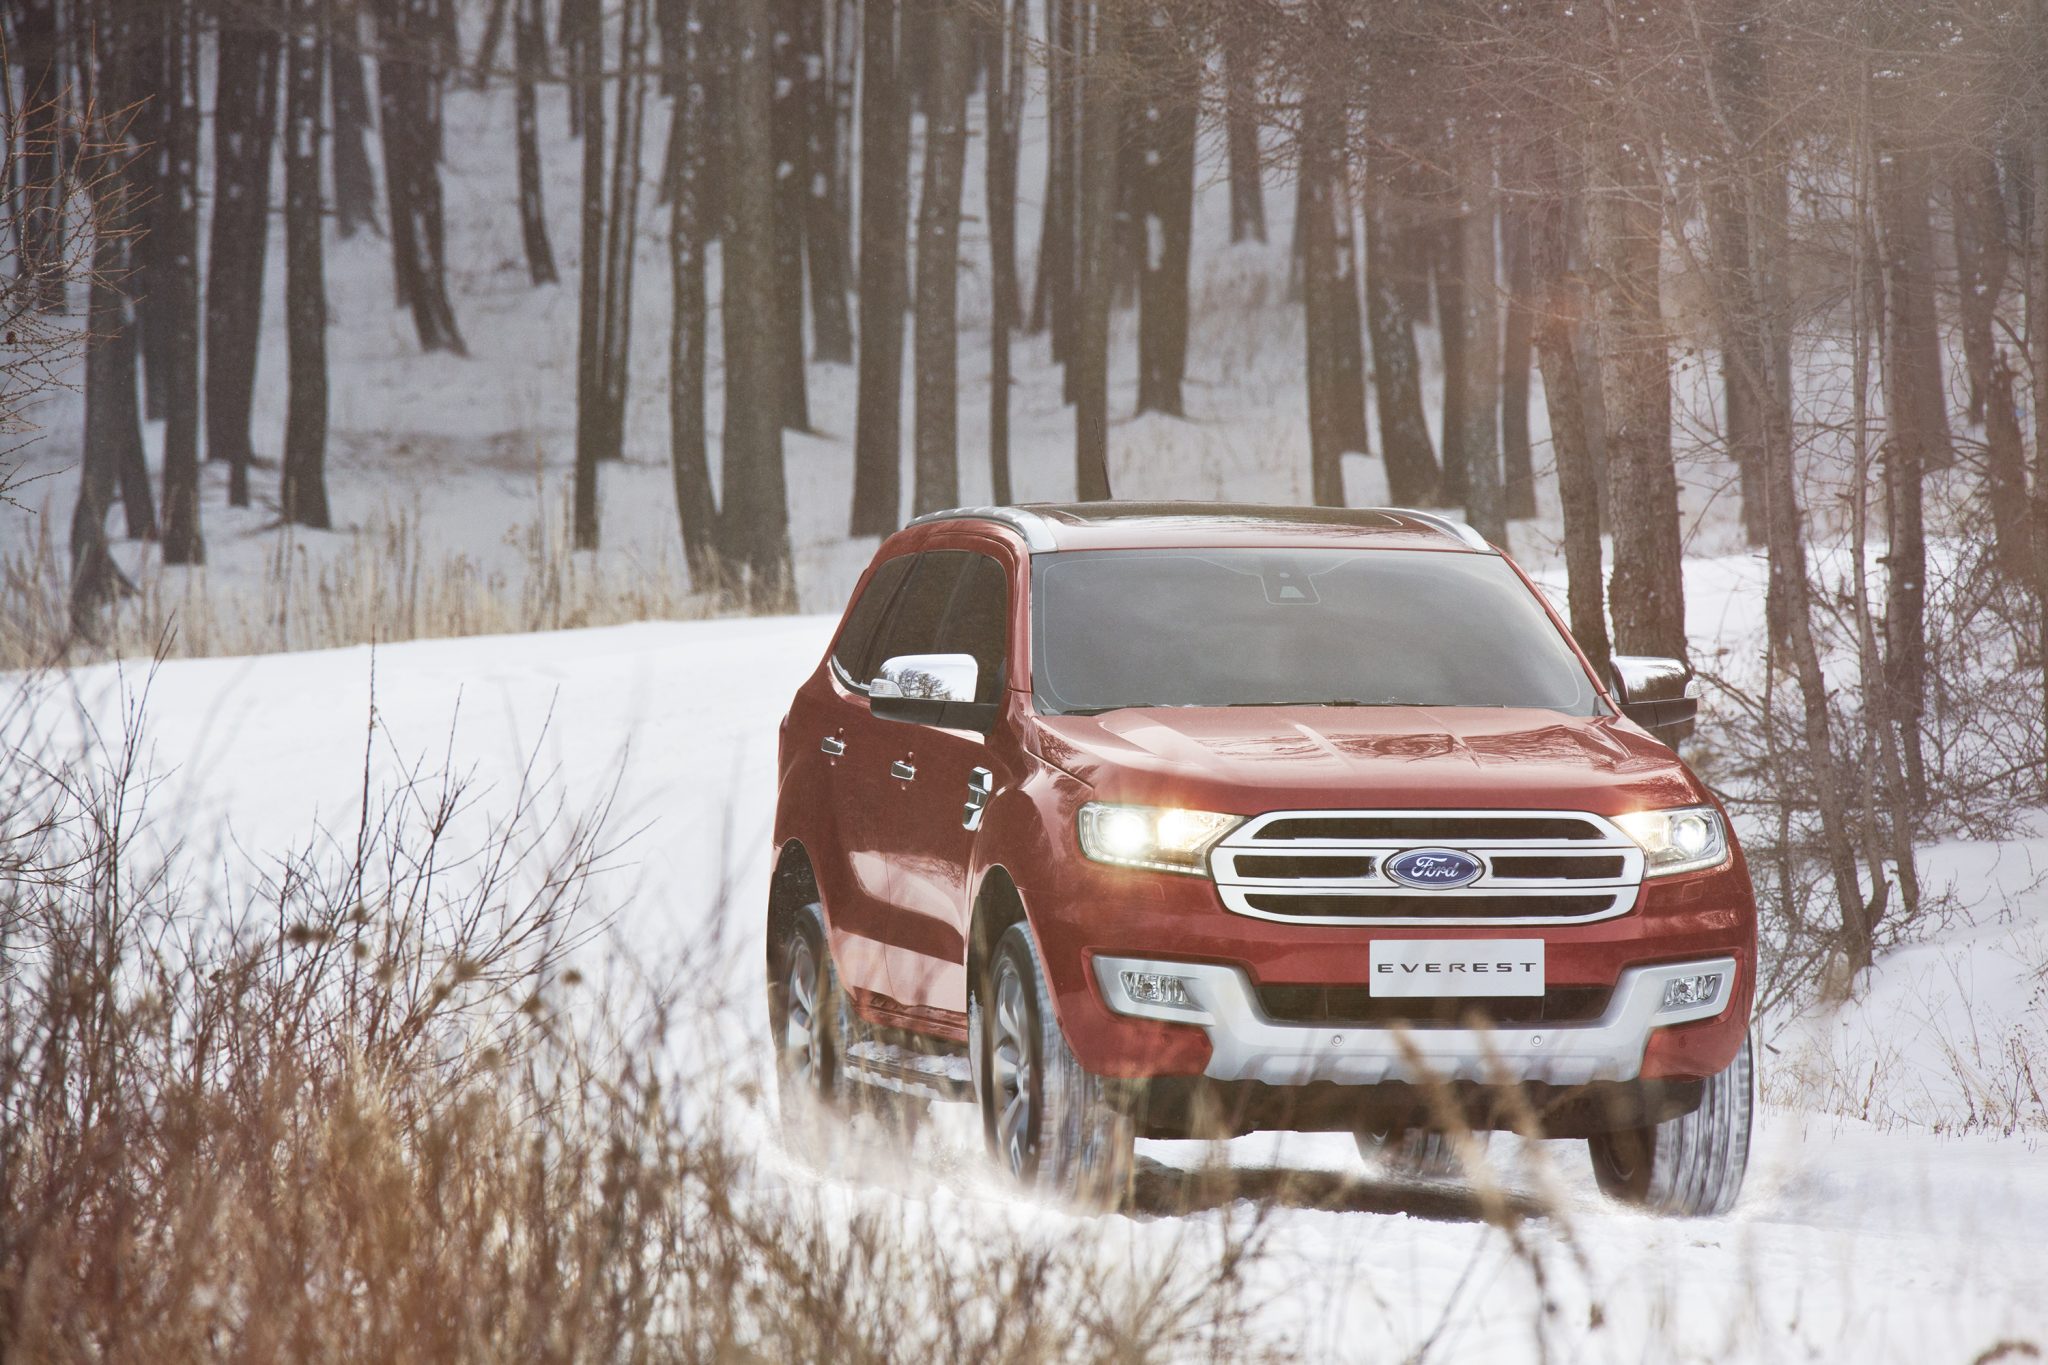 New Ford Everest-Snow